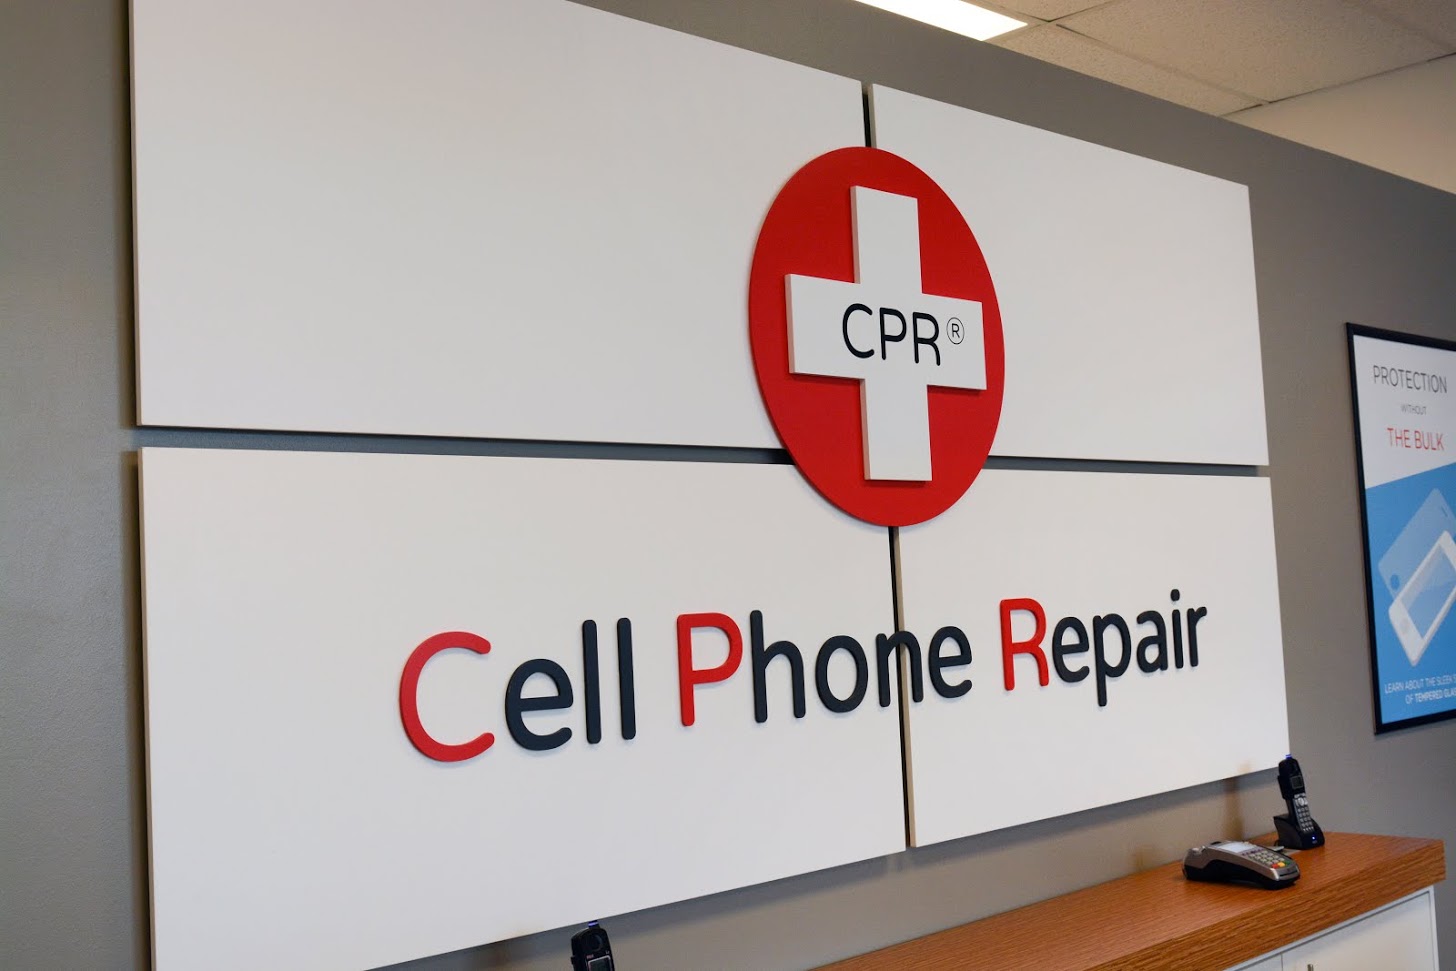 CPR Cell Phone Repair, Monday, March 4, 2019, Press release picture